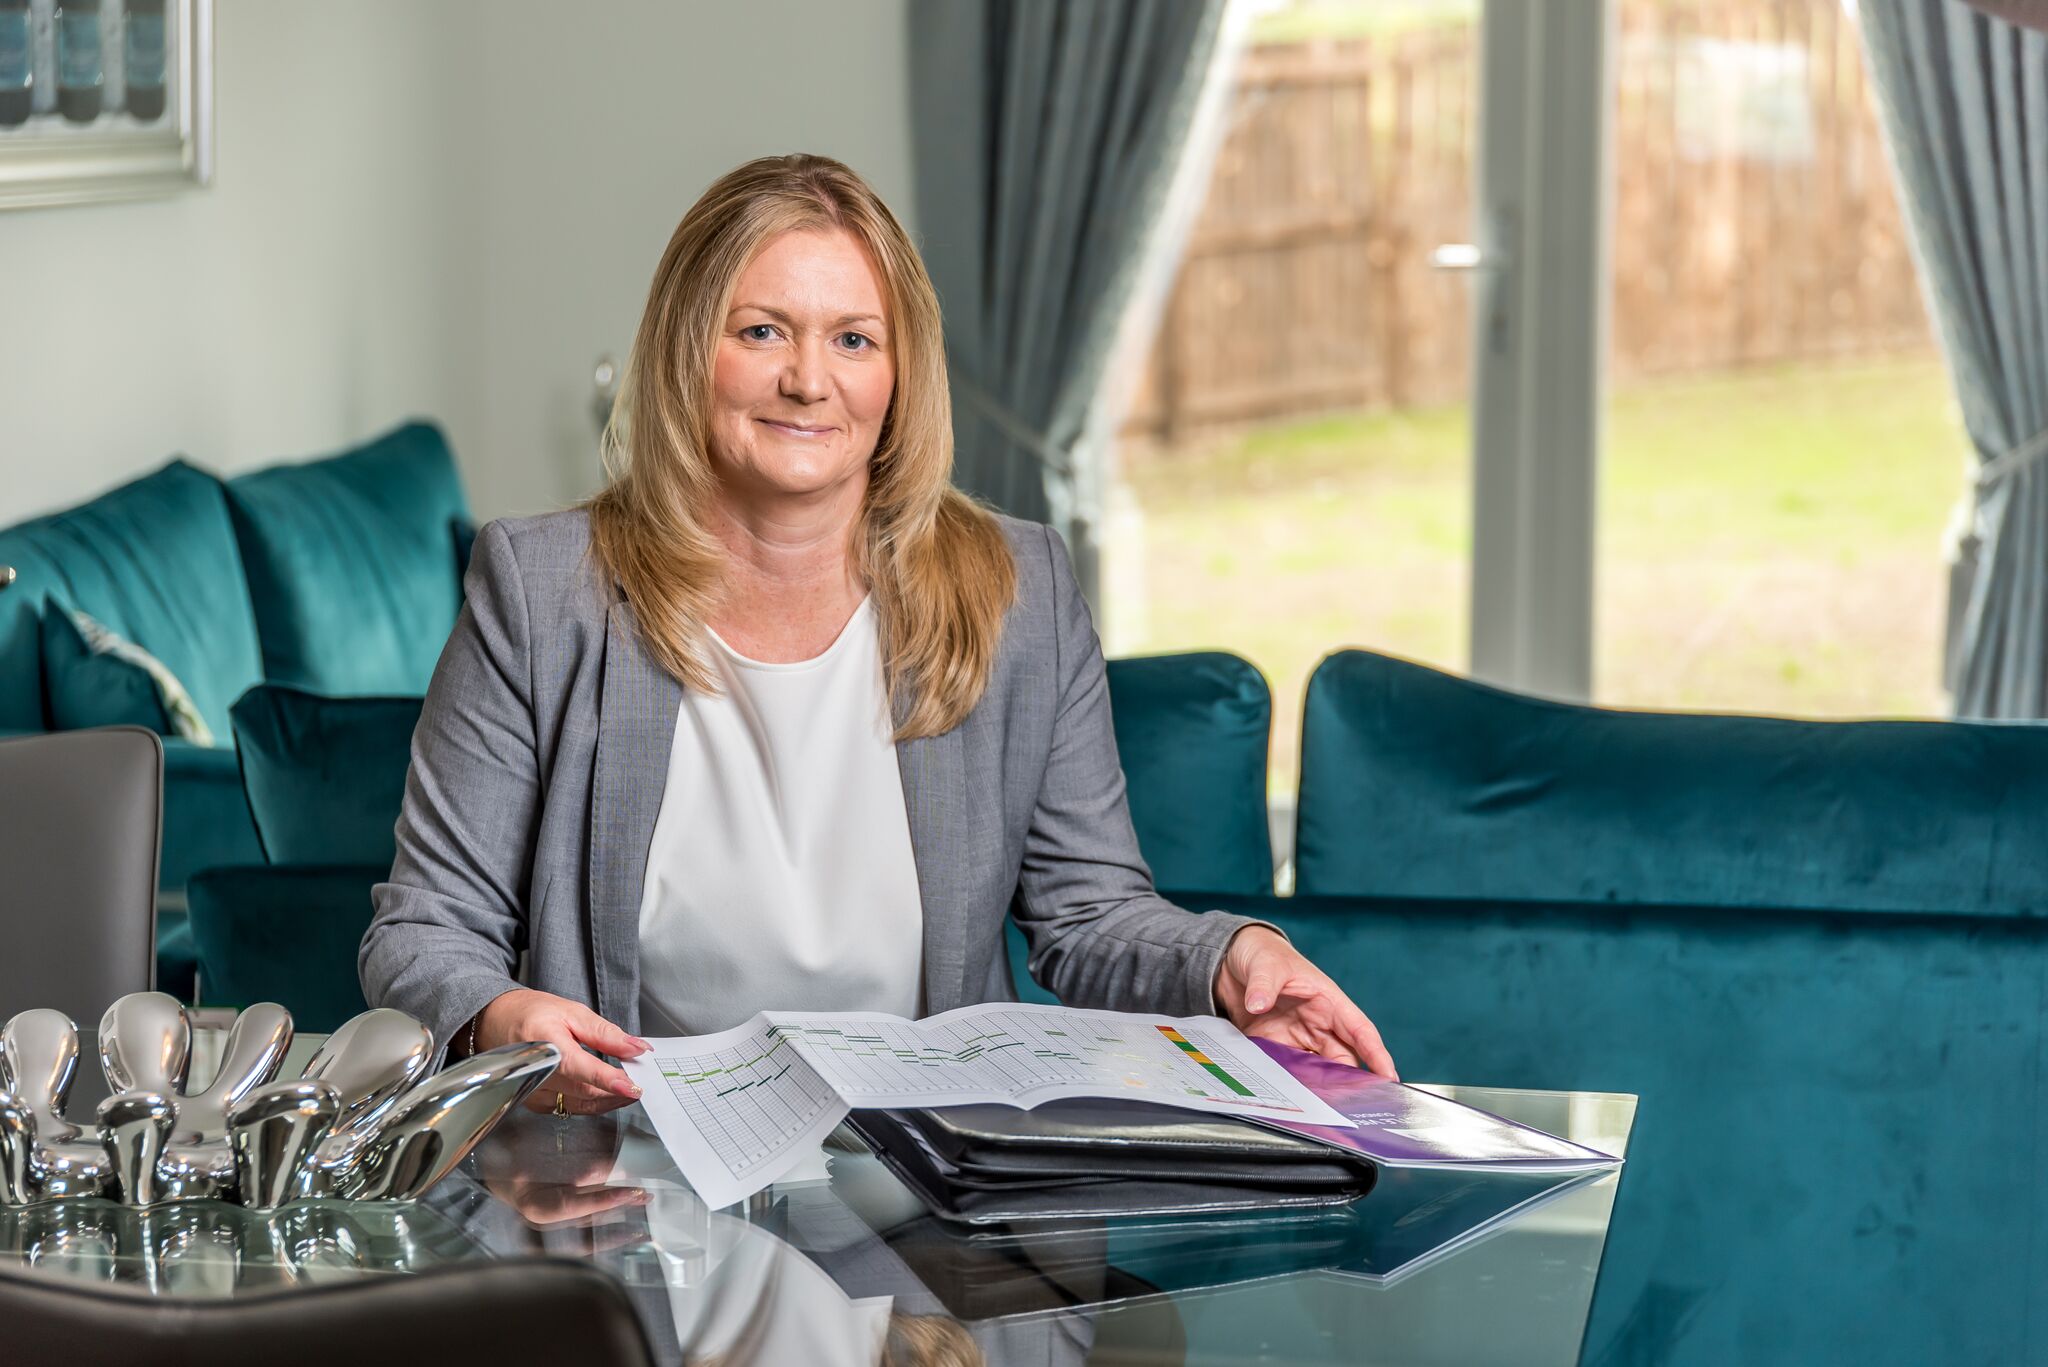 Property developer teams up with mortgage advisor to help Tayside home buyers